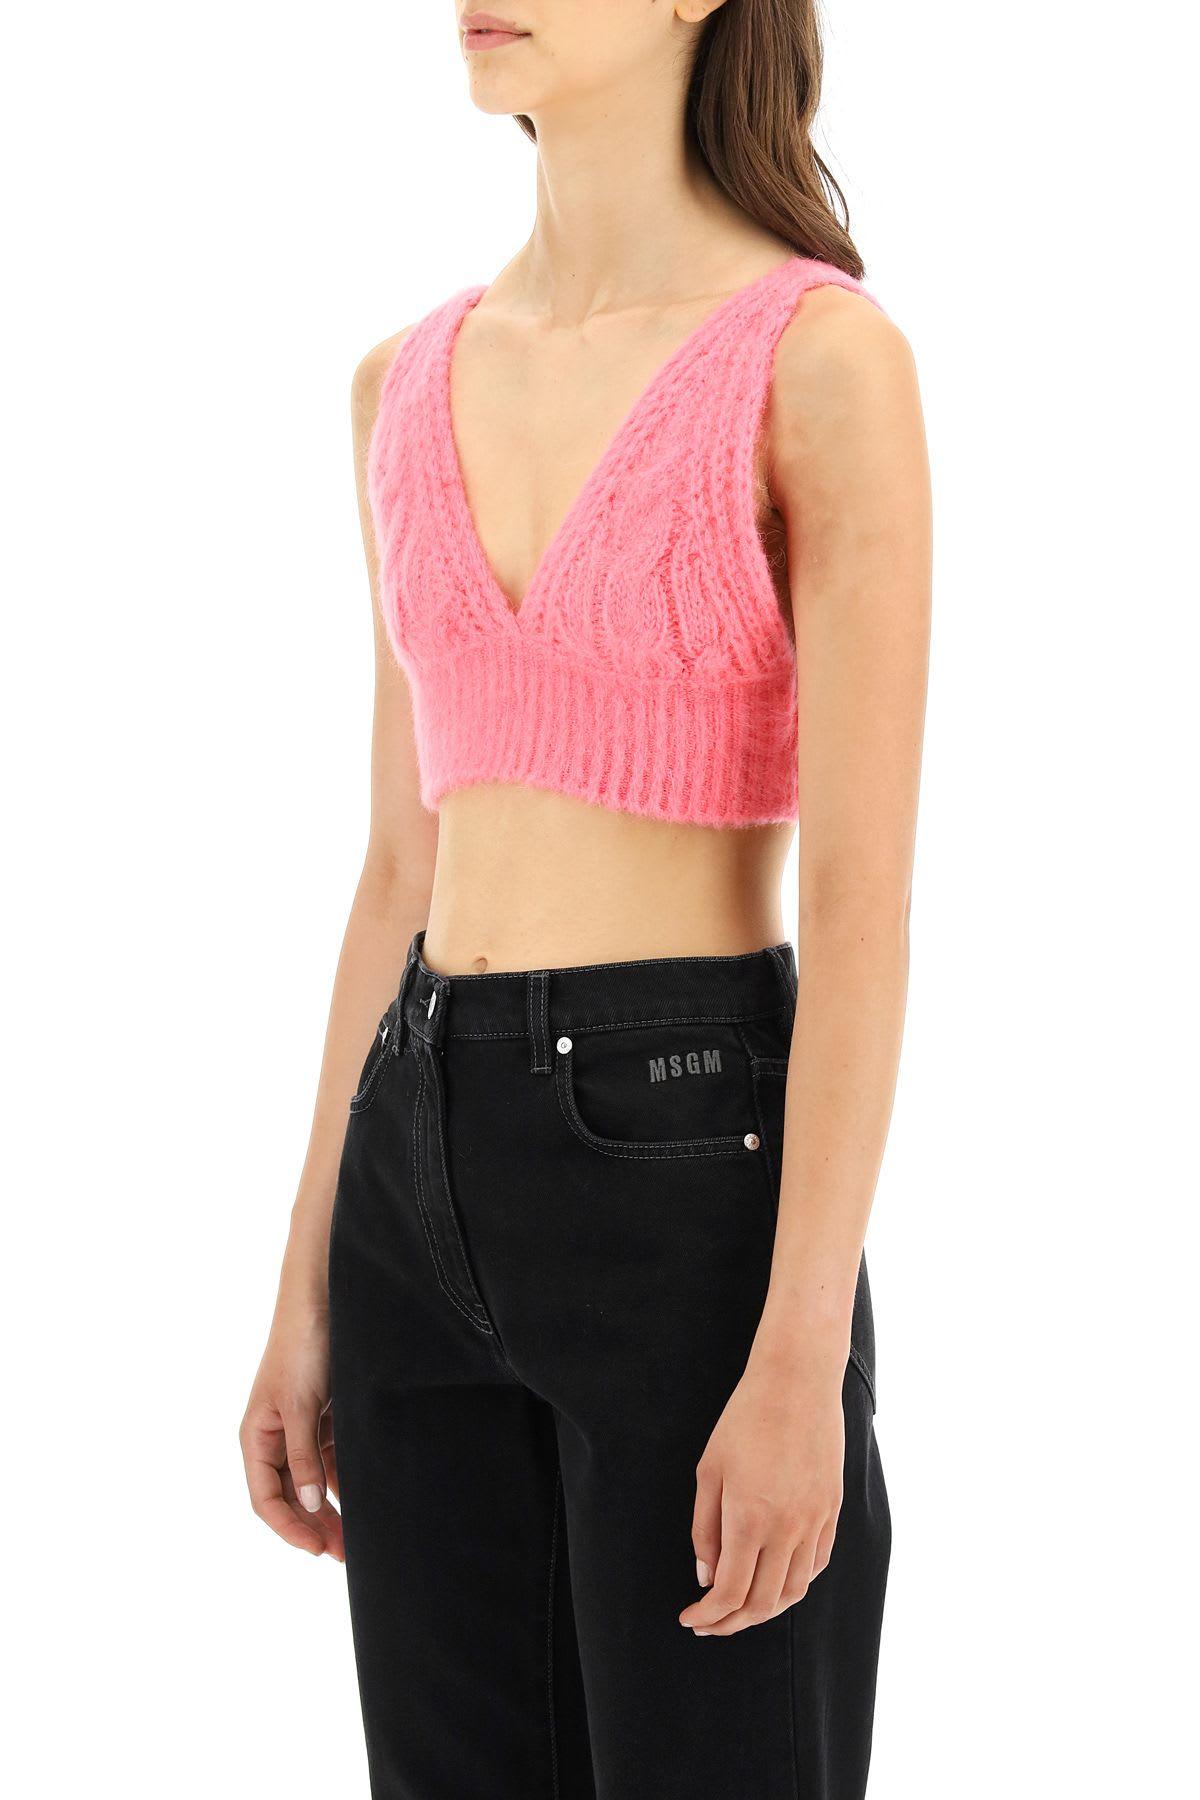 MSGM Mohair Bralette Top in Pink